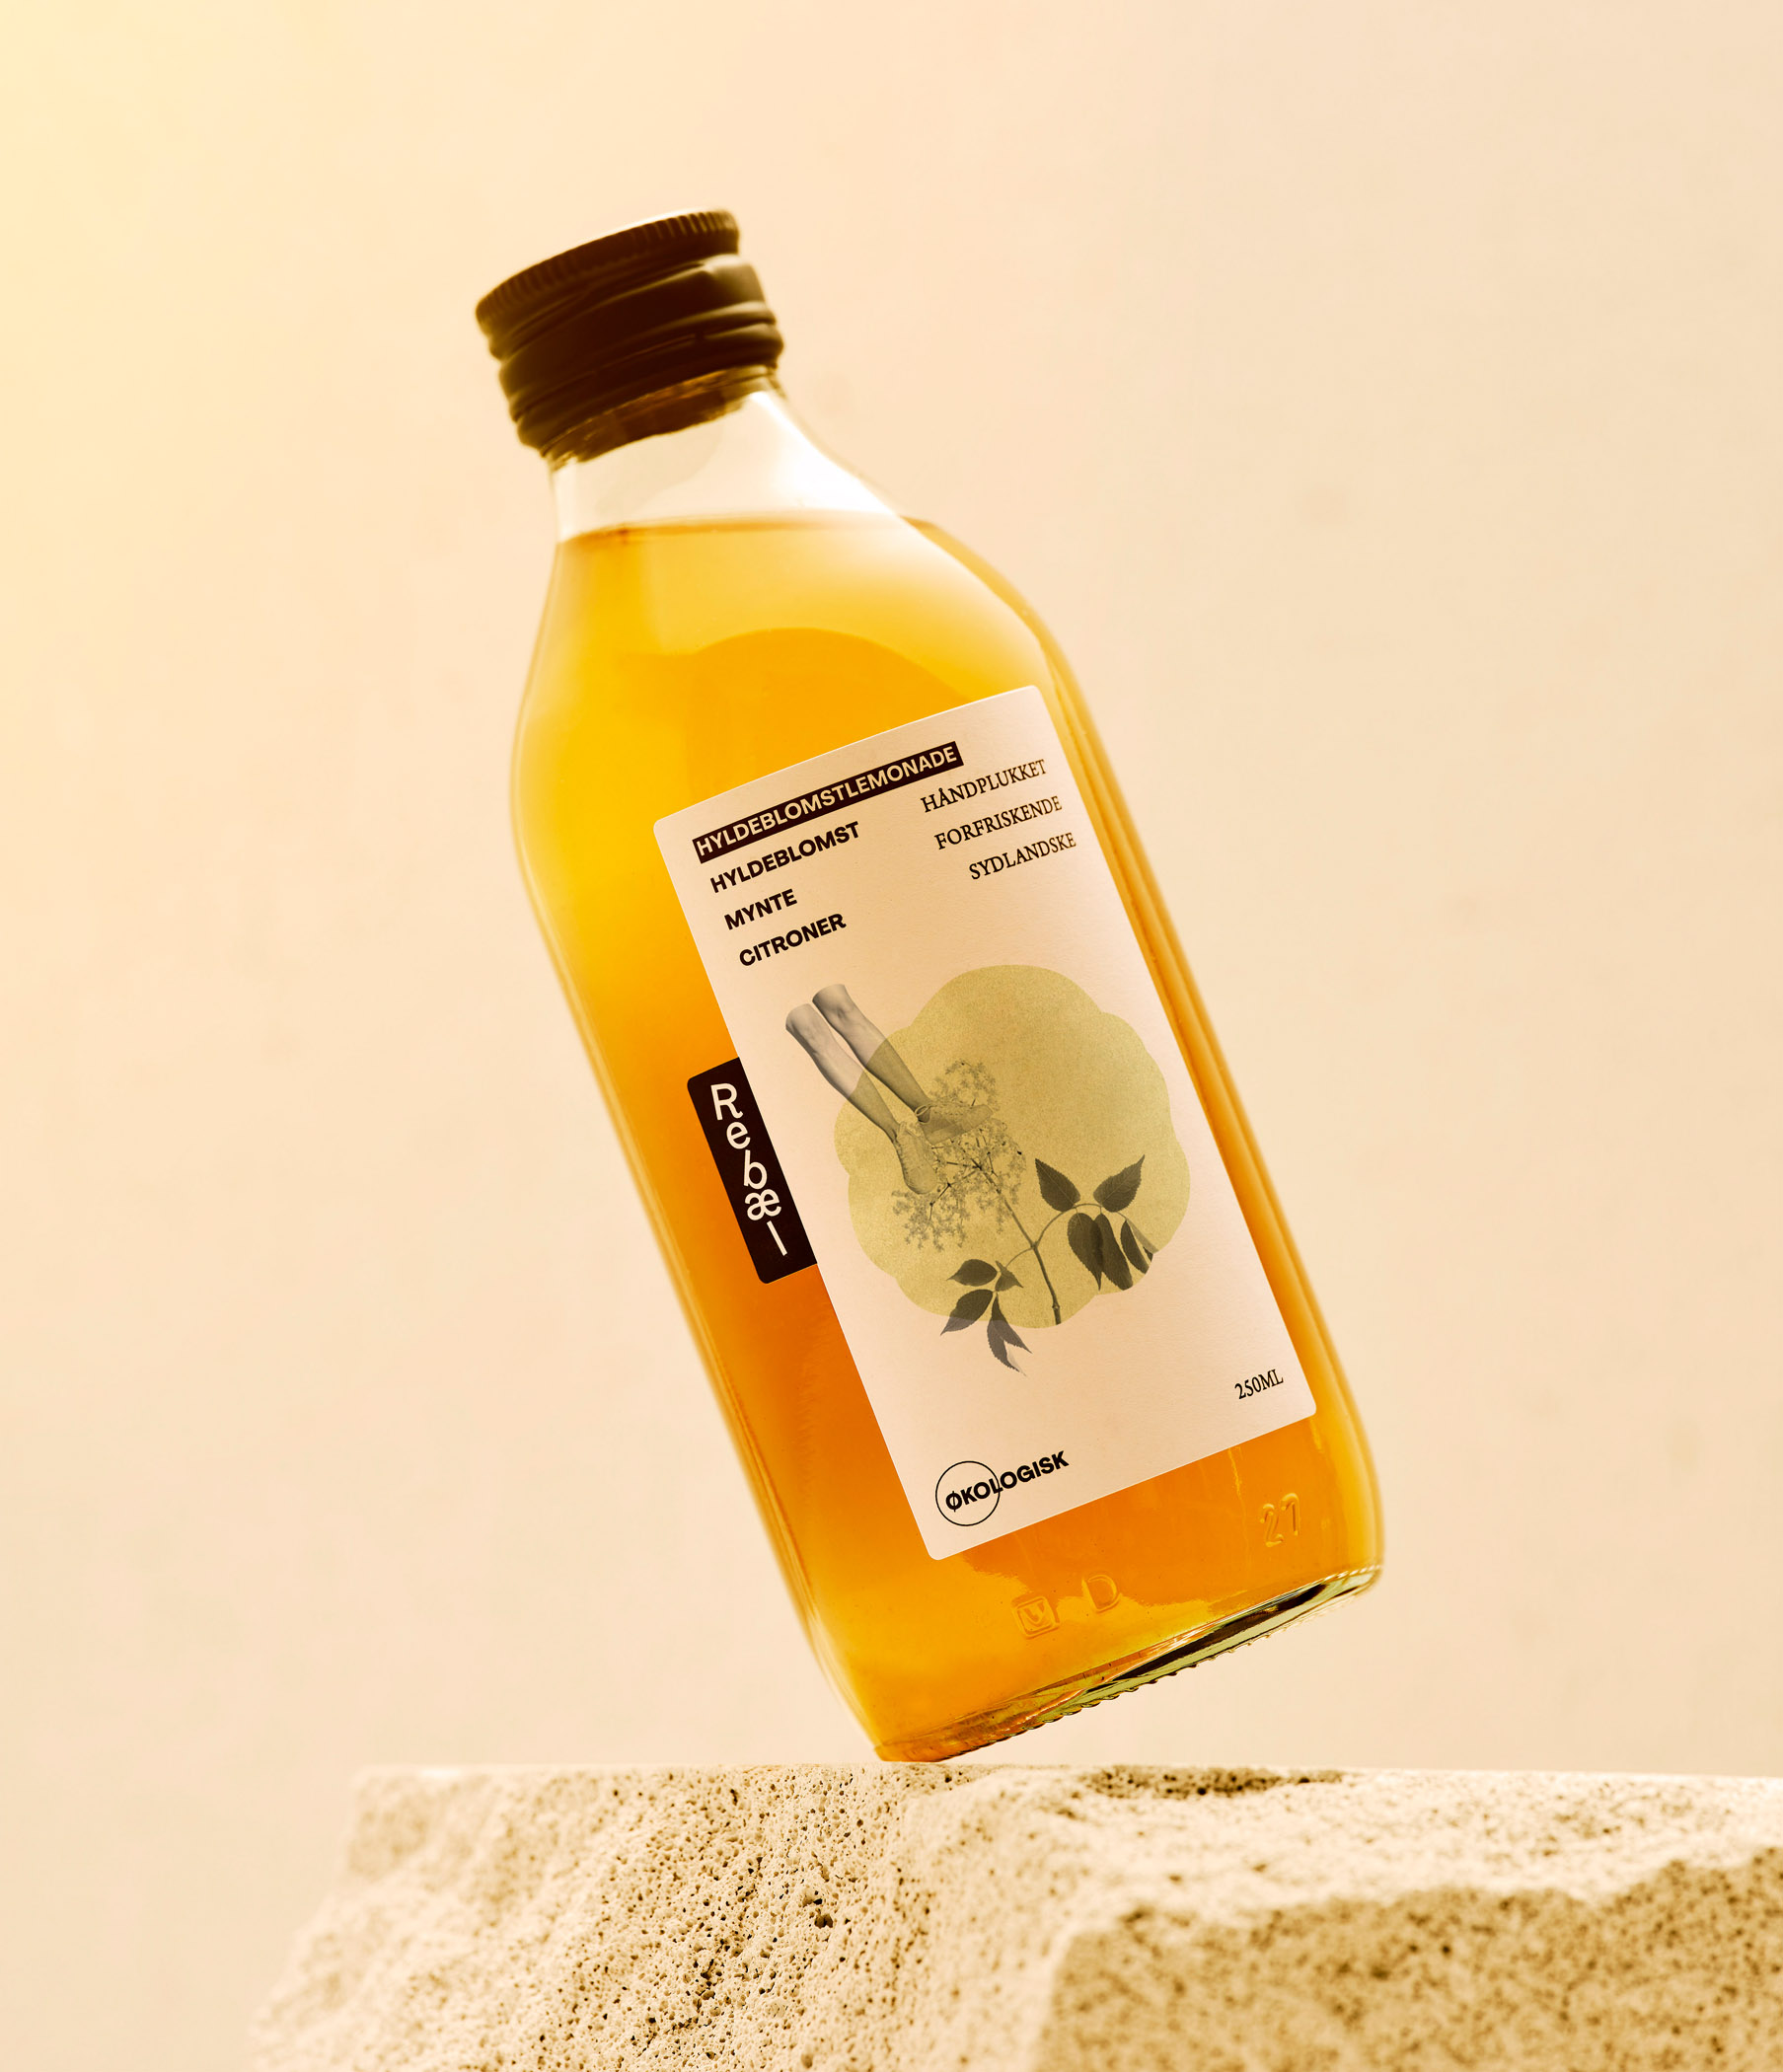 Packaging Redesign For Danish Juice Brand Rebæl By Everland